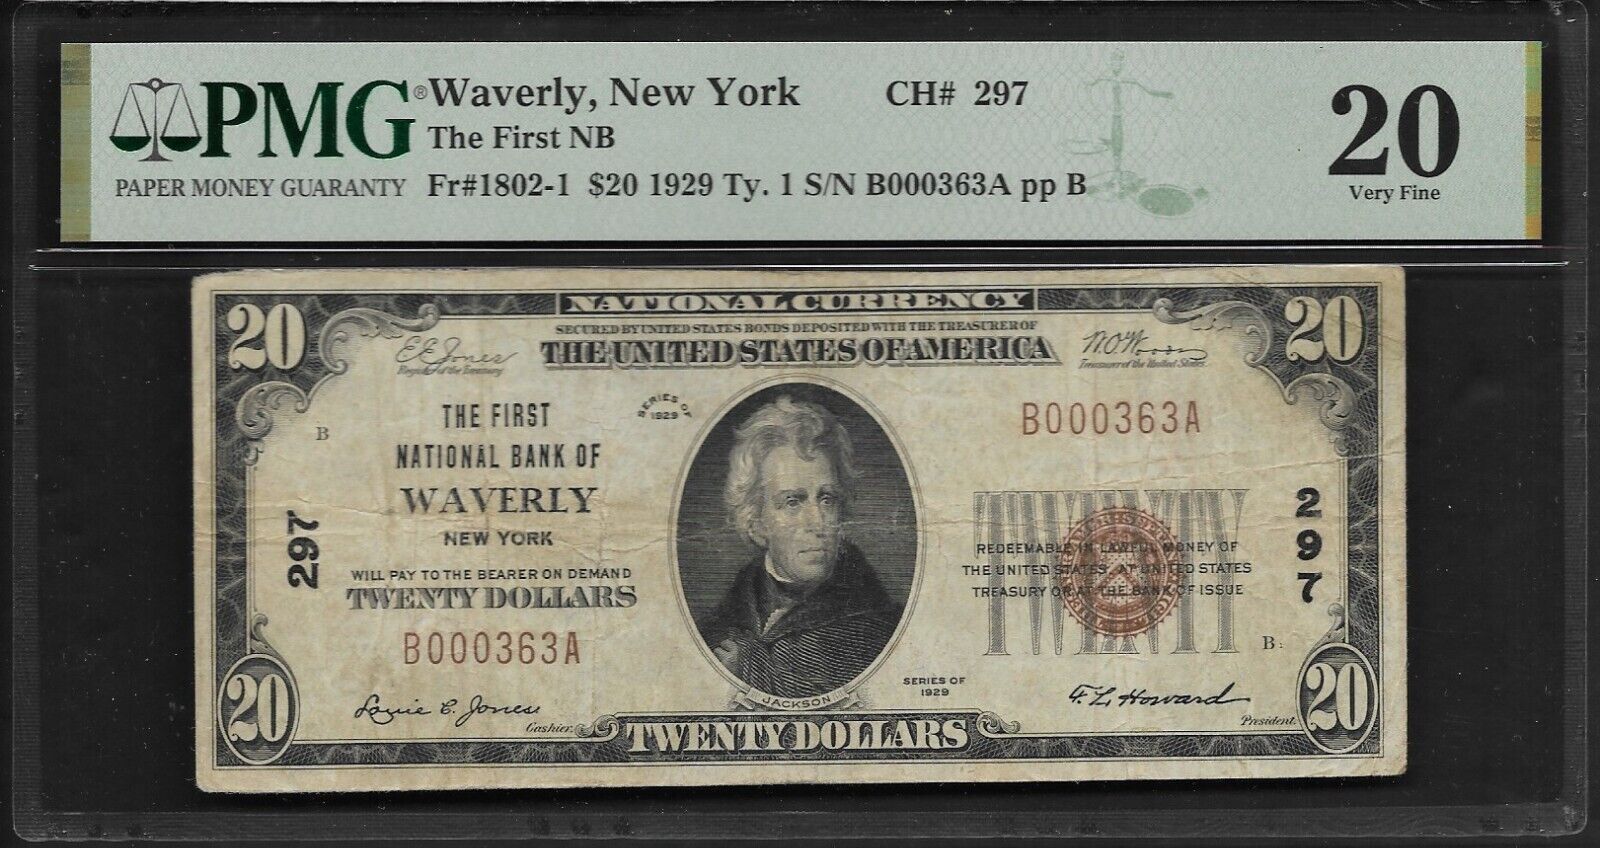 Waverly New York National Bank Note, series 1929, PMG Very Fine